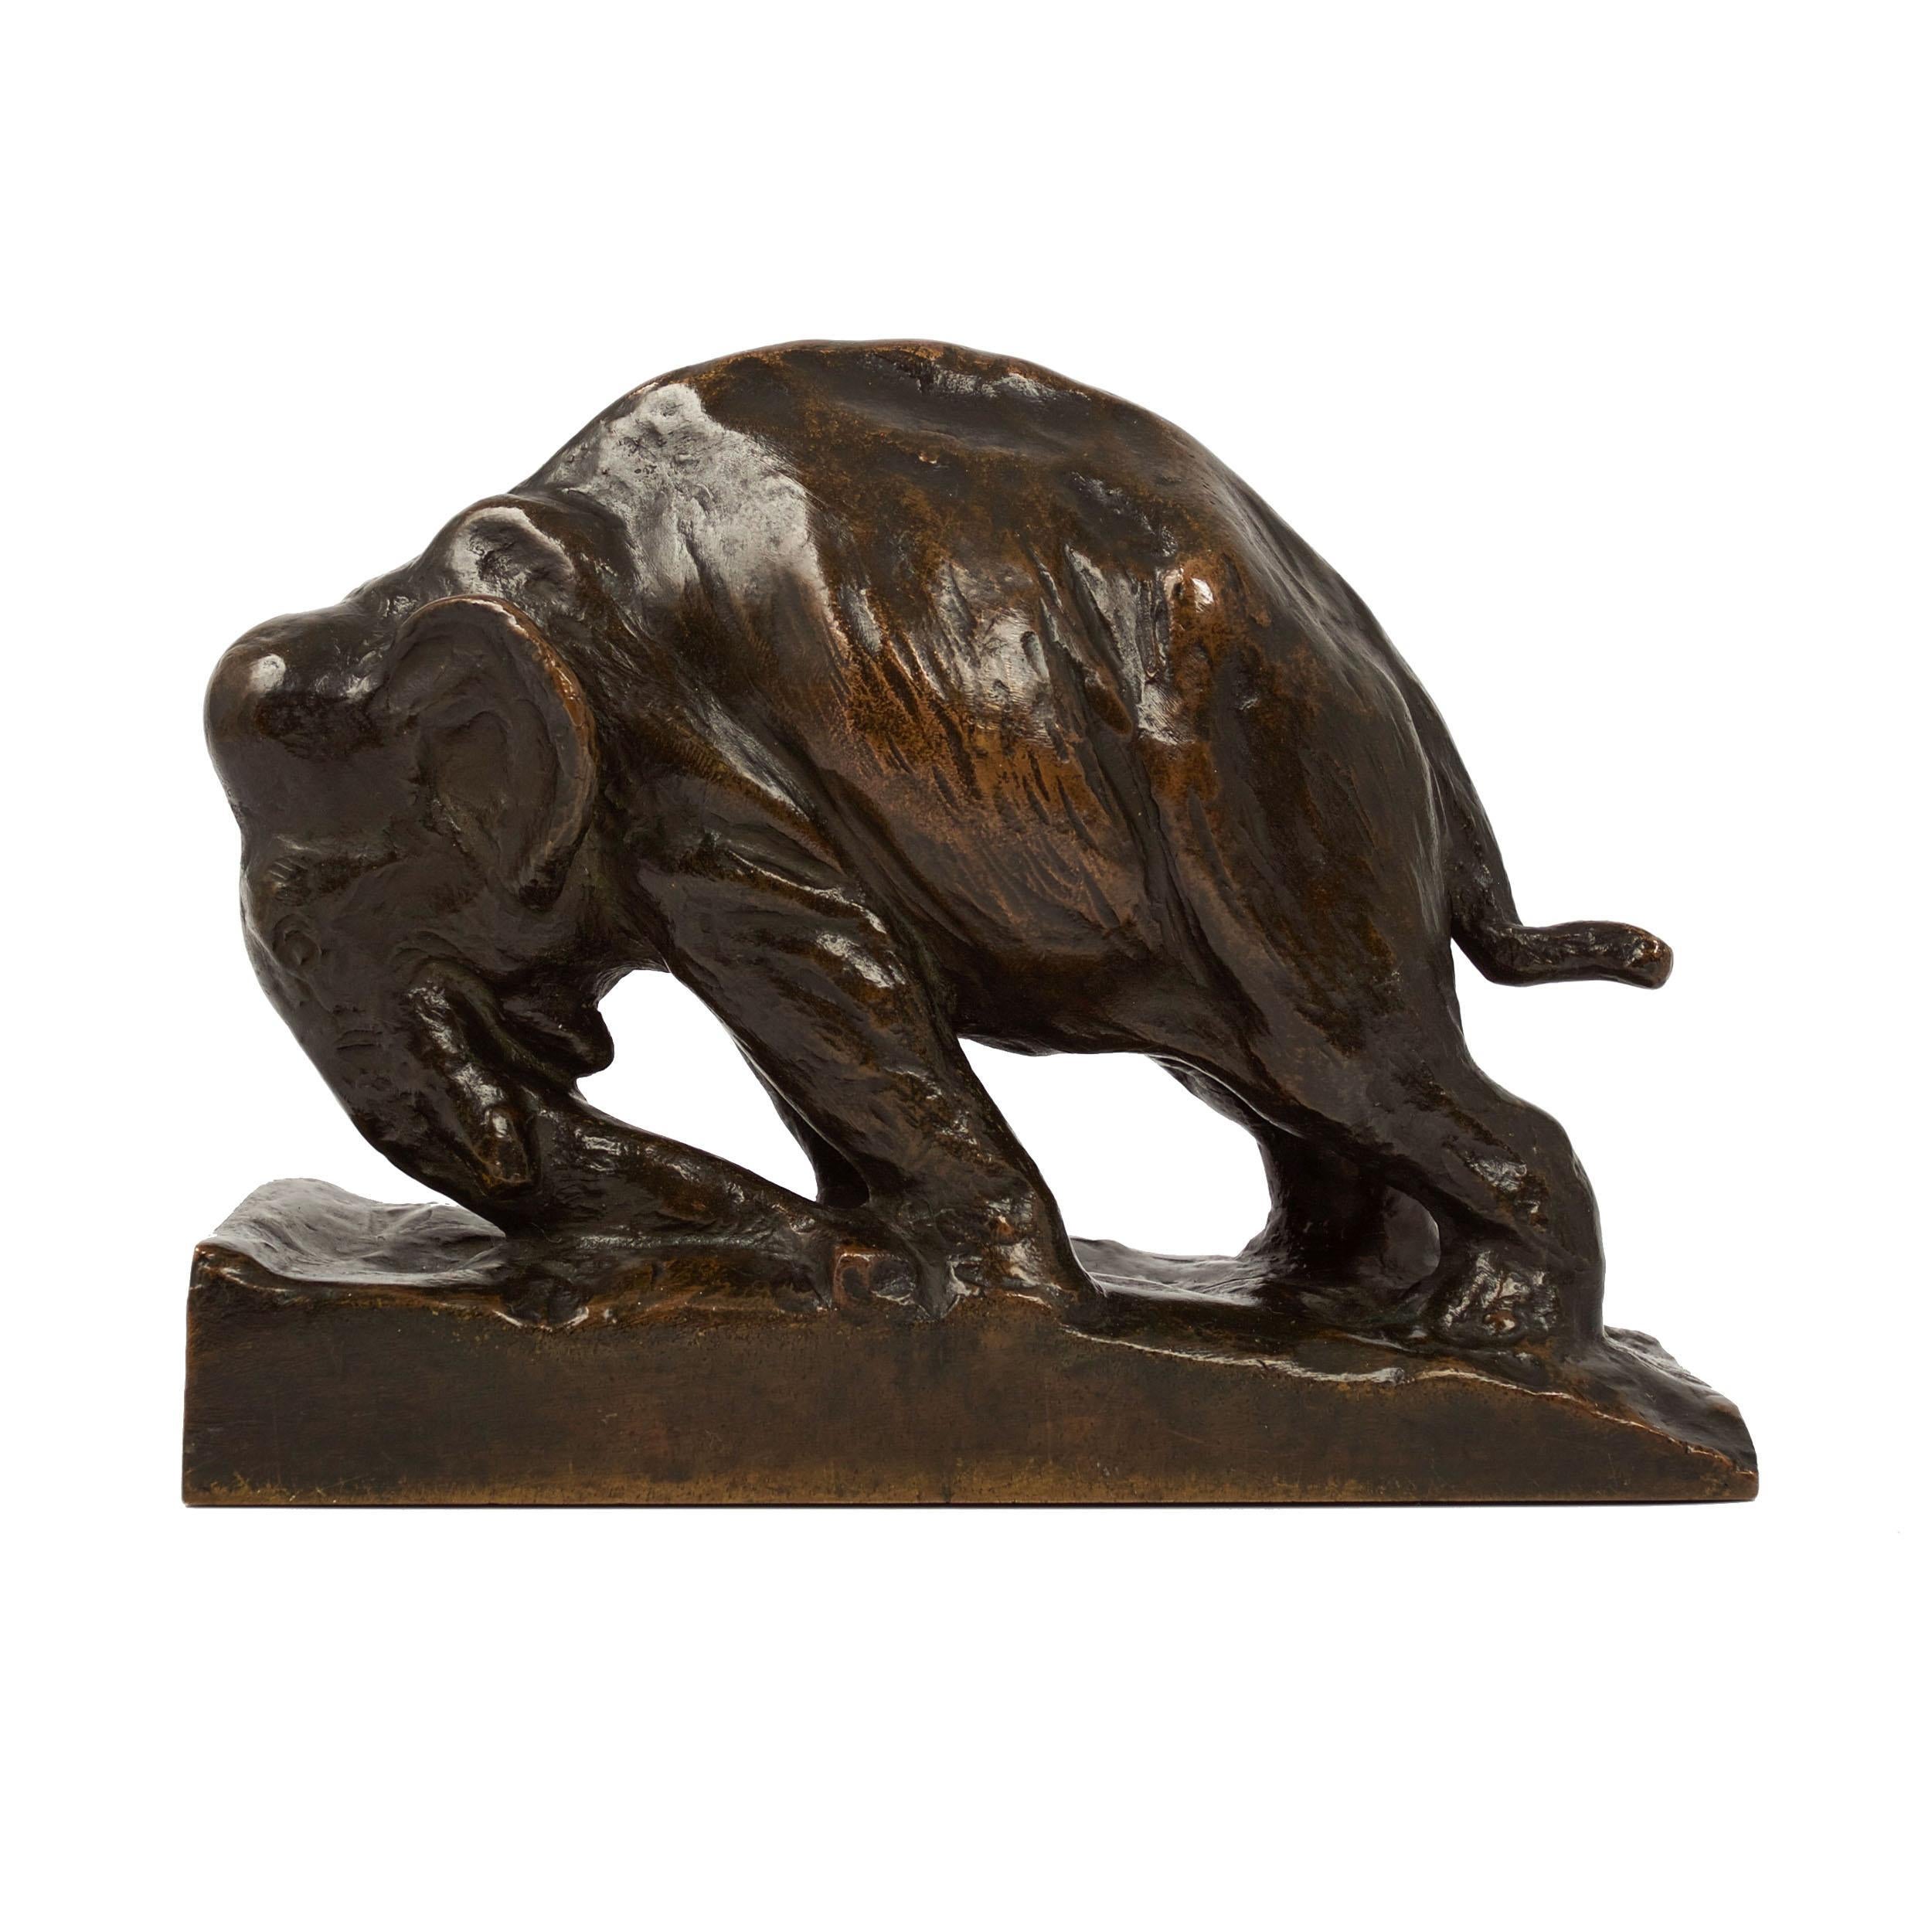 A model that Mahonri Young contracted to both the Griffoul foundry in Newark and the Gorham Co. foundry in New York, the Pushing Elephant bookends were one of his most sought-after works. The present sculpture was executed by Gorham Co. using the